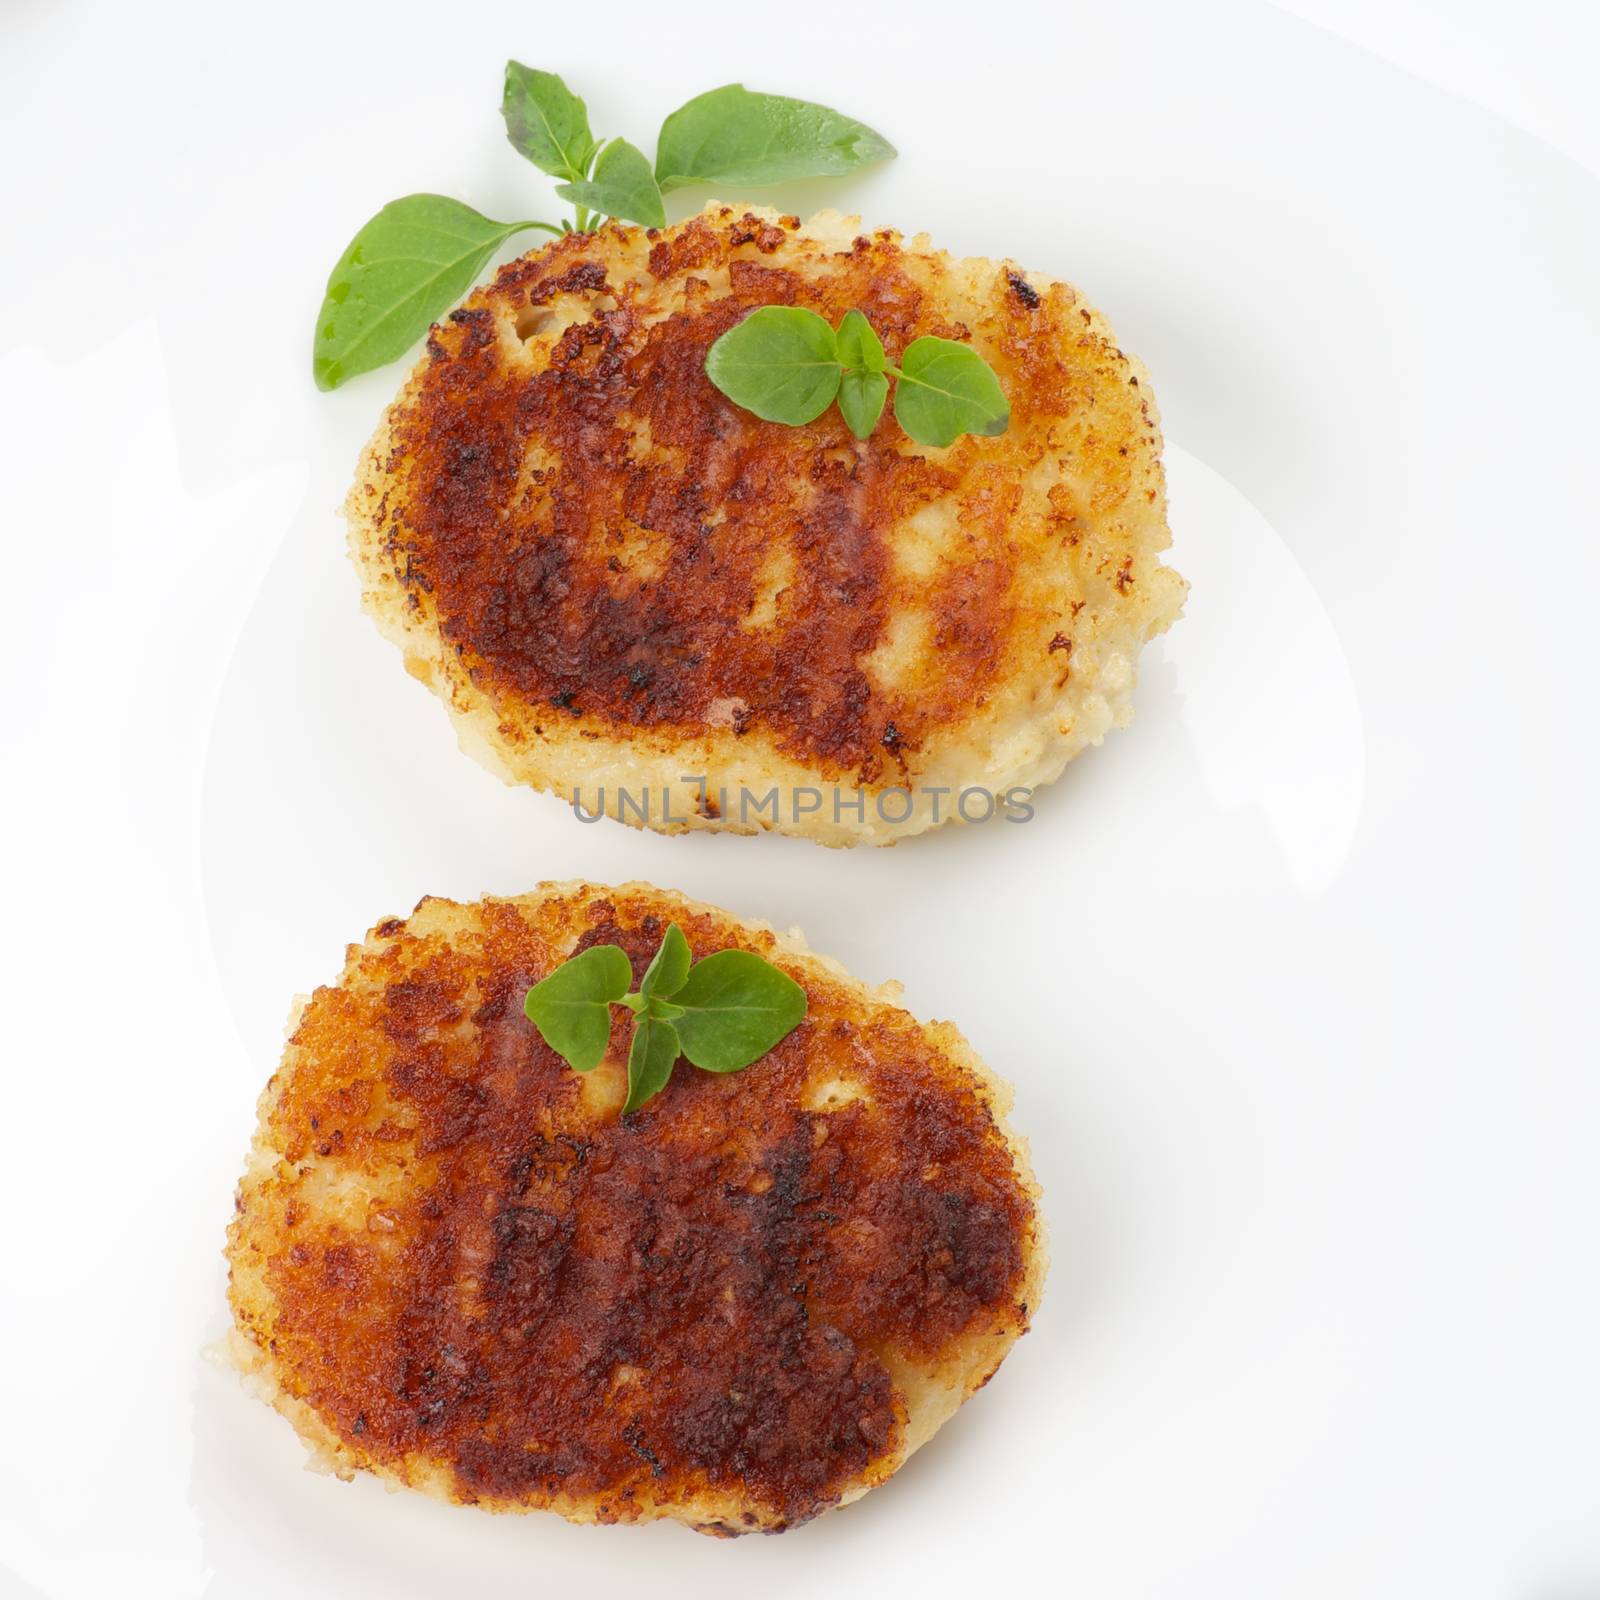 Delicious Chicken Meat Cutlets Decorated with Basil closeup on White Plate